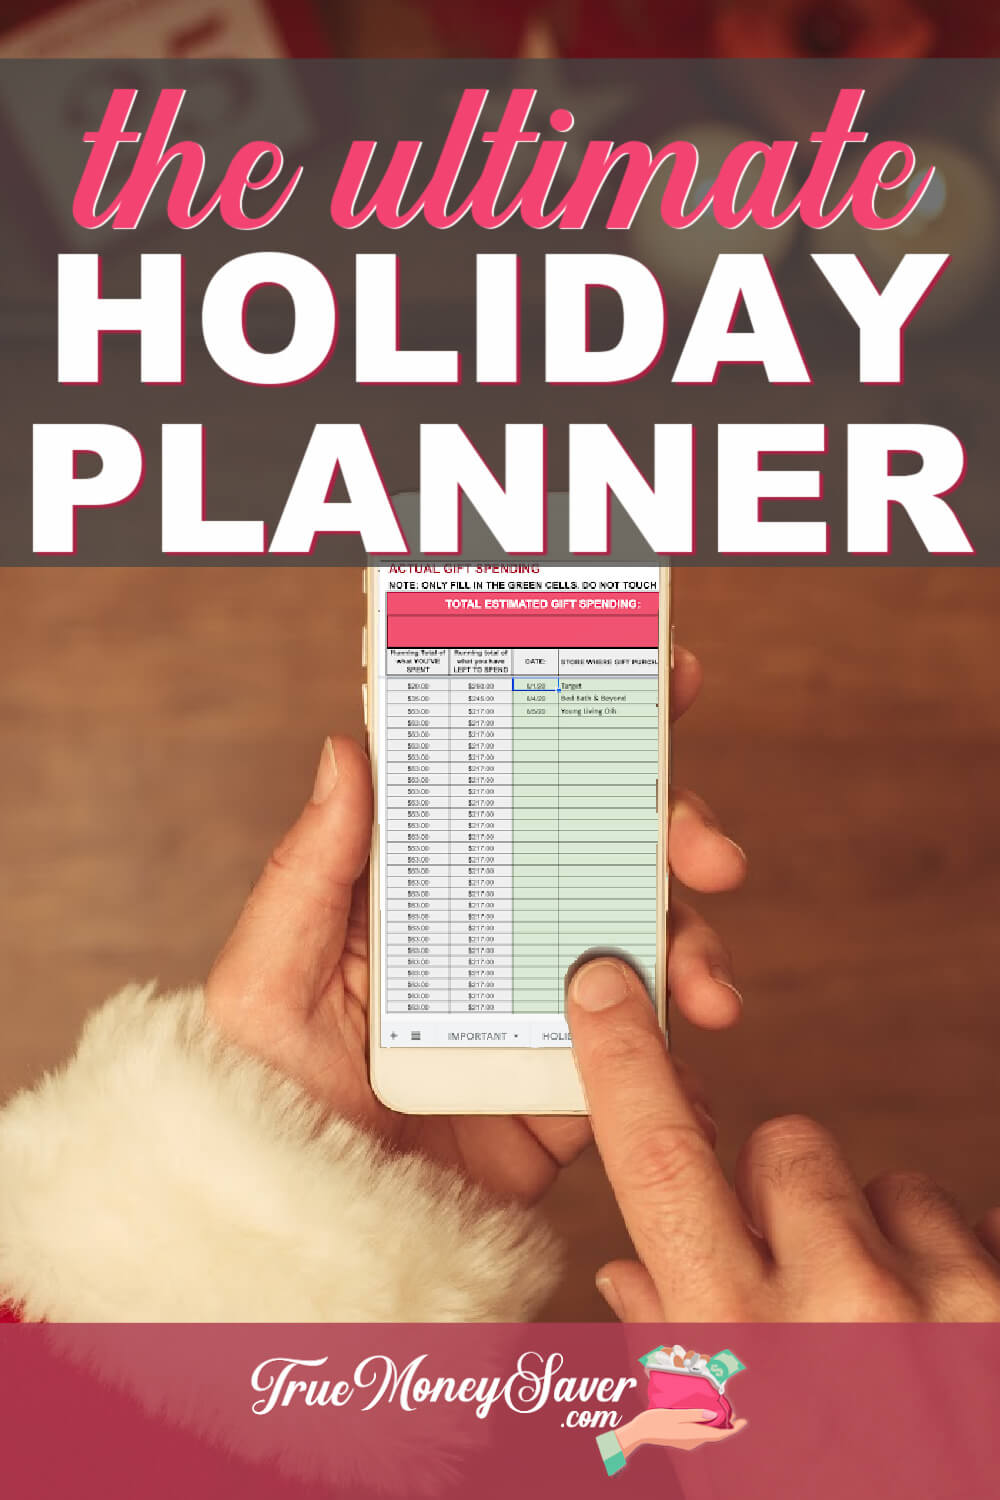 How To Get Ahead Of The Game With The Ultimate Holiday Planner